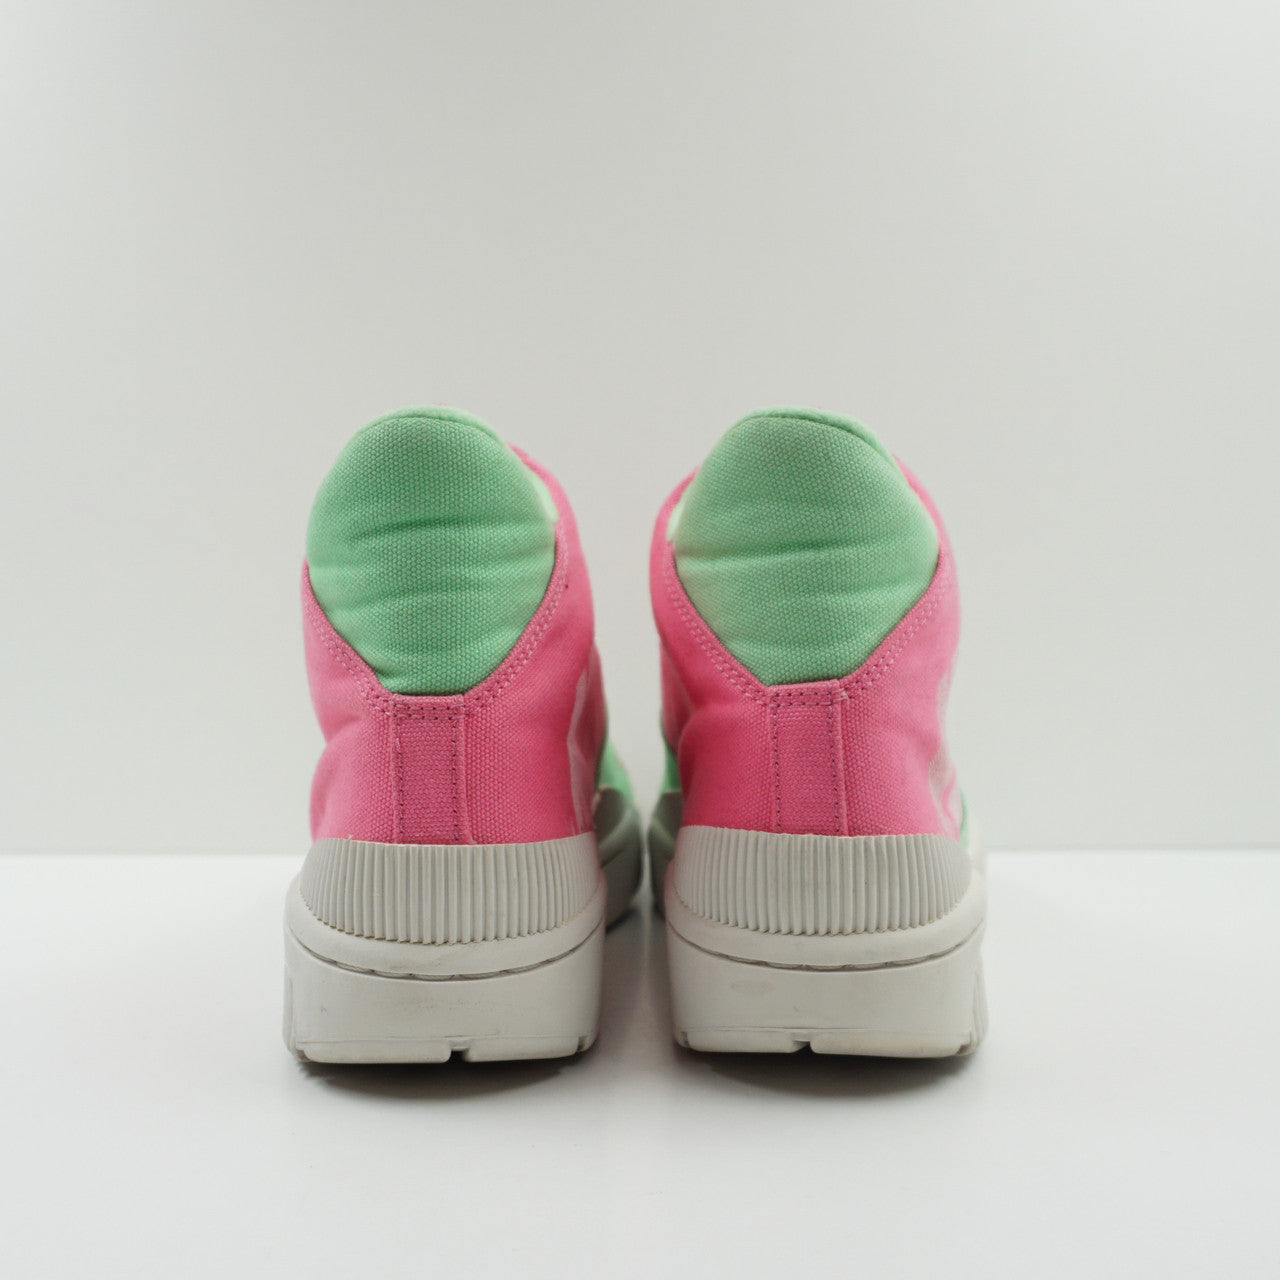 Nike Outbreak High Canvas Pink/Green